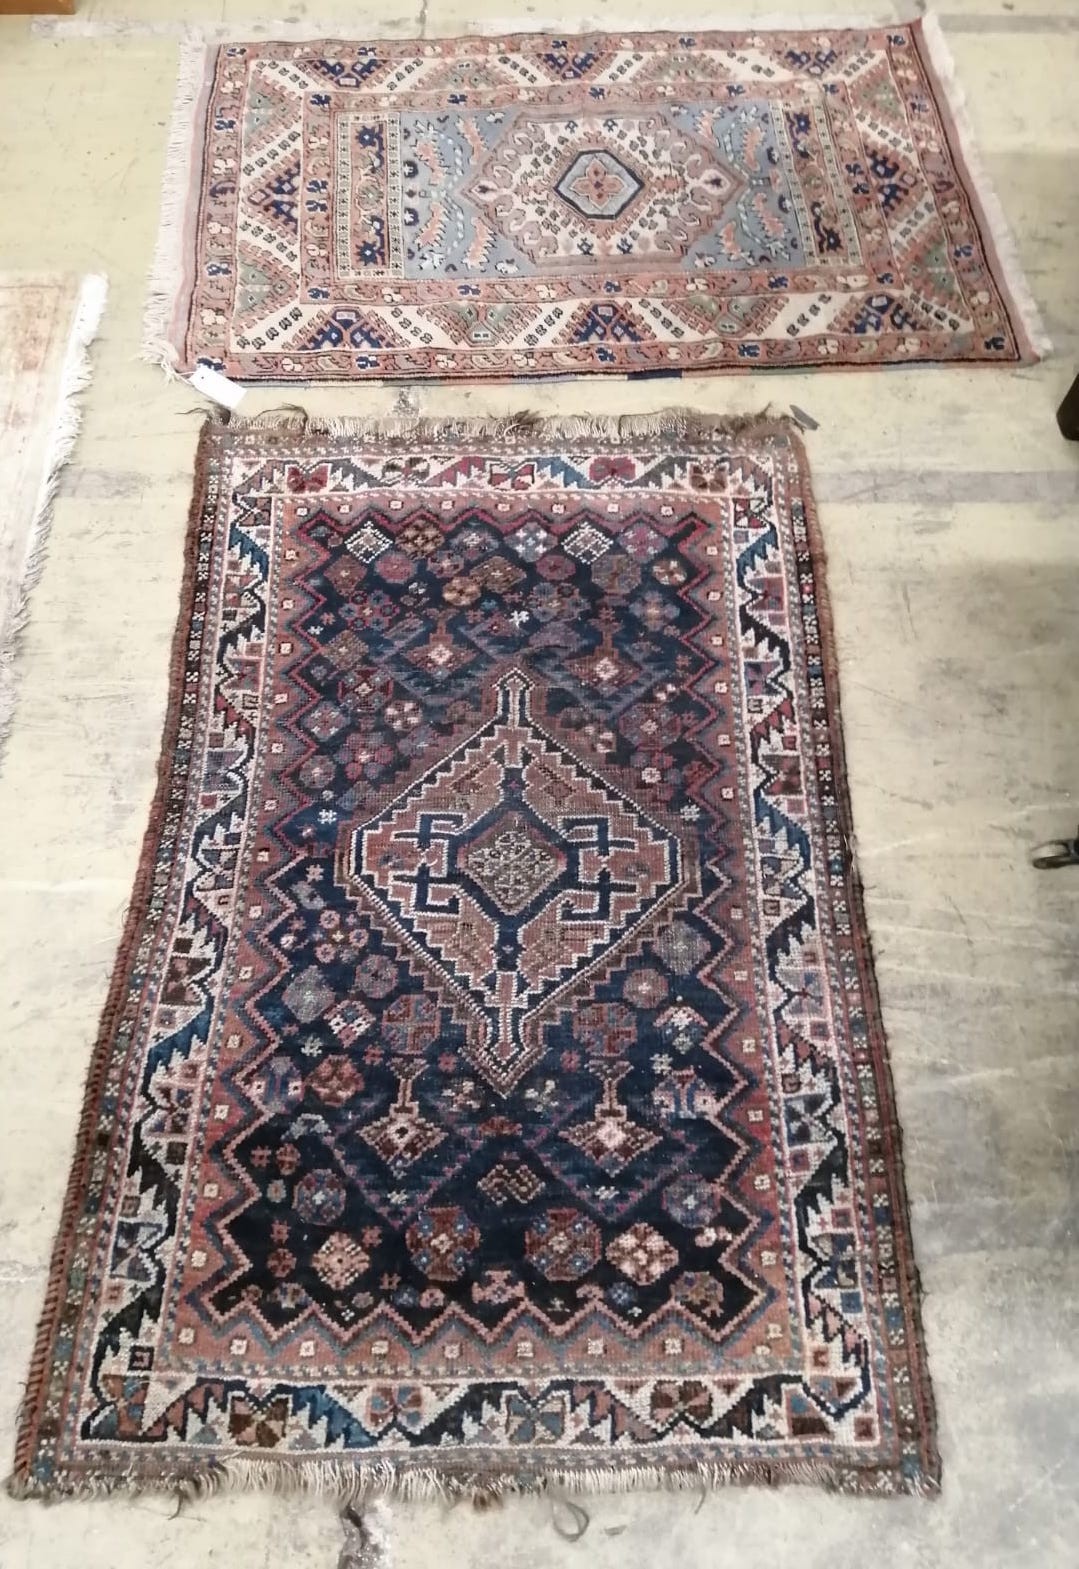 Two Caucasian and Shiraz blue ground rugs, larger 120 x 80cm